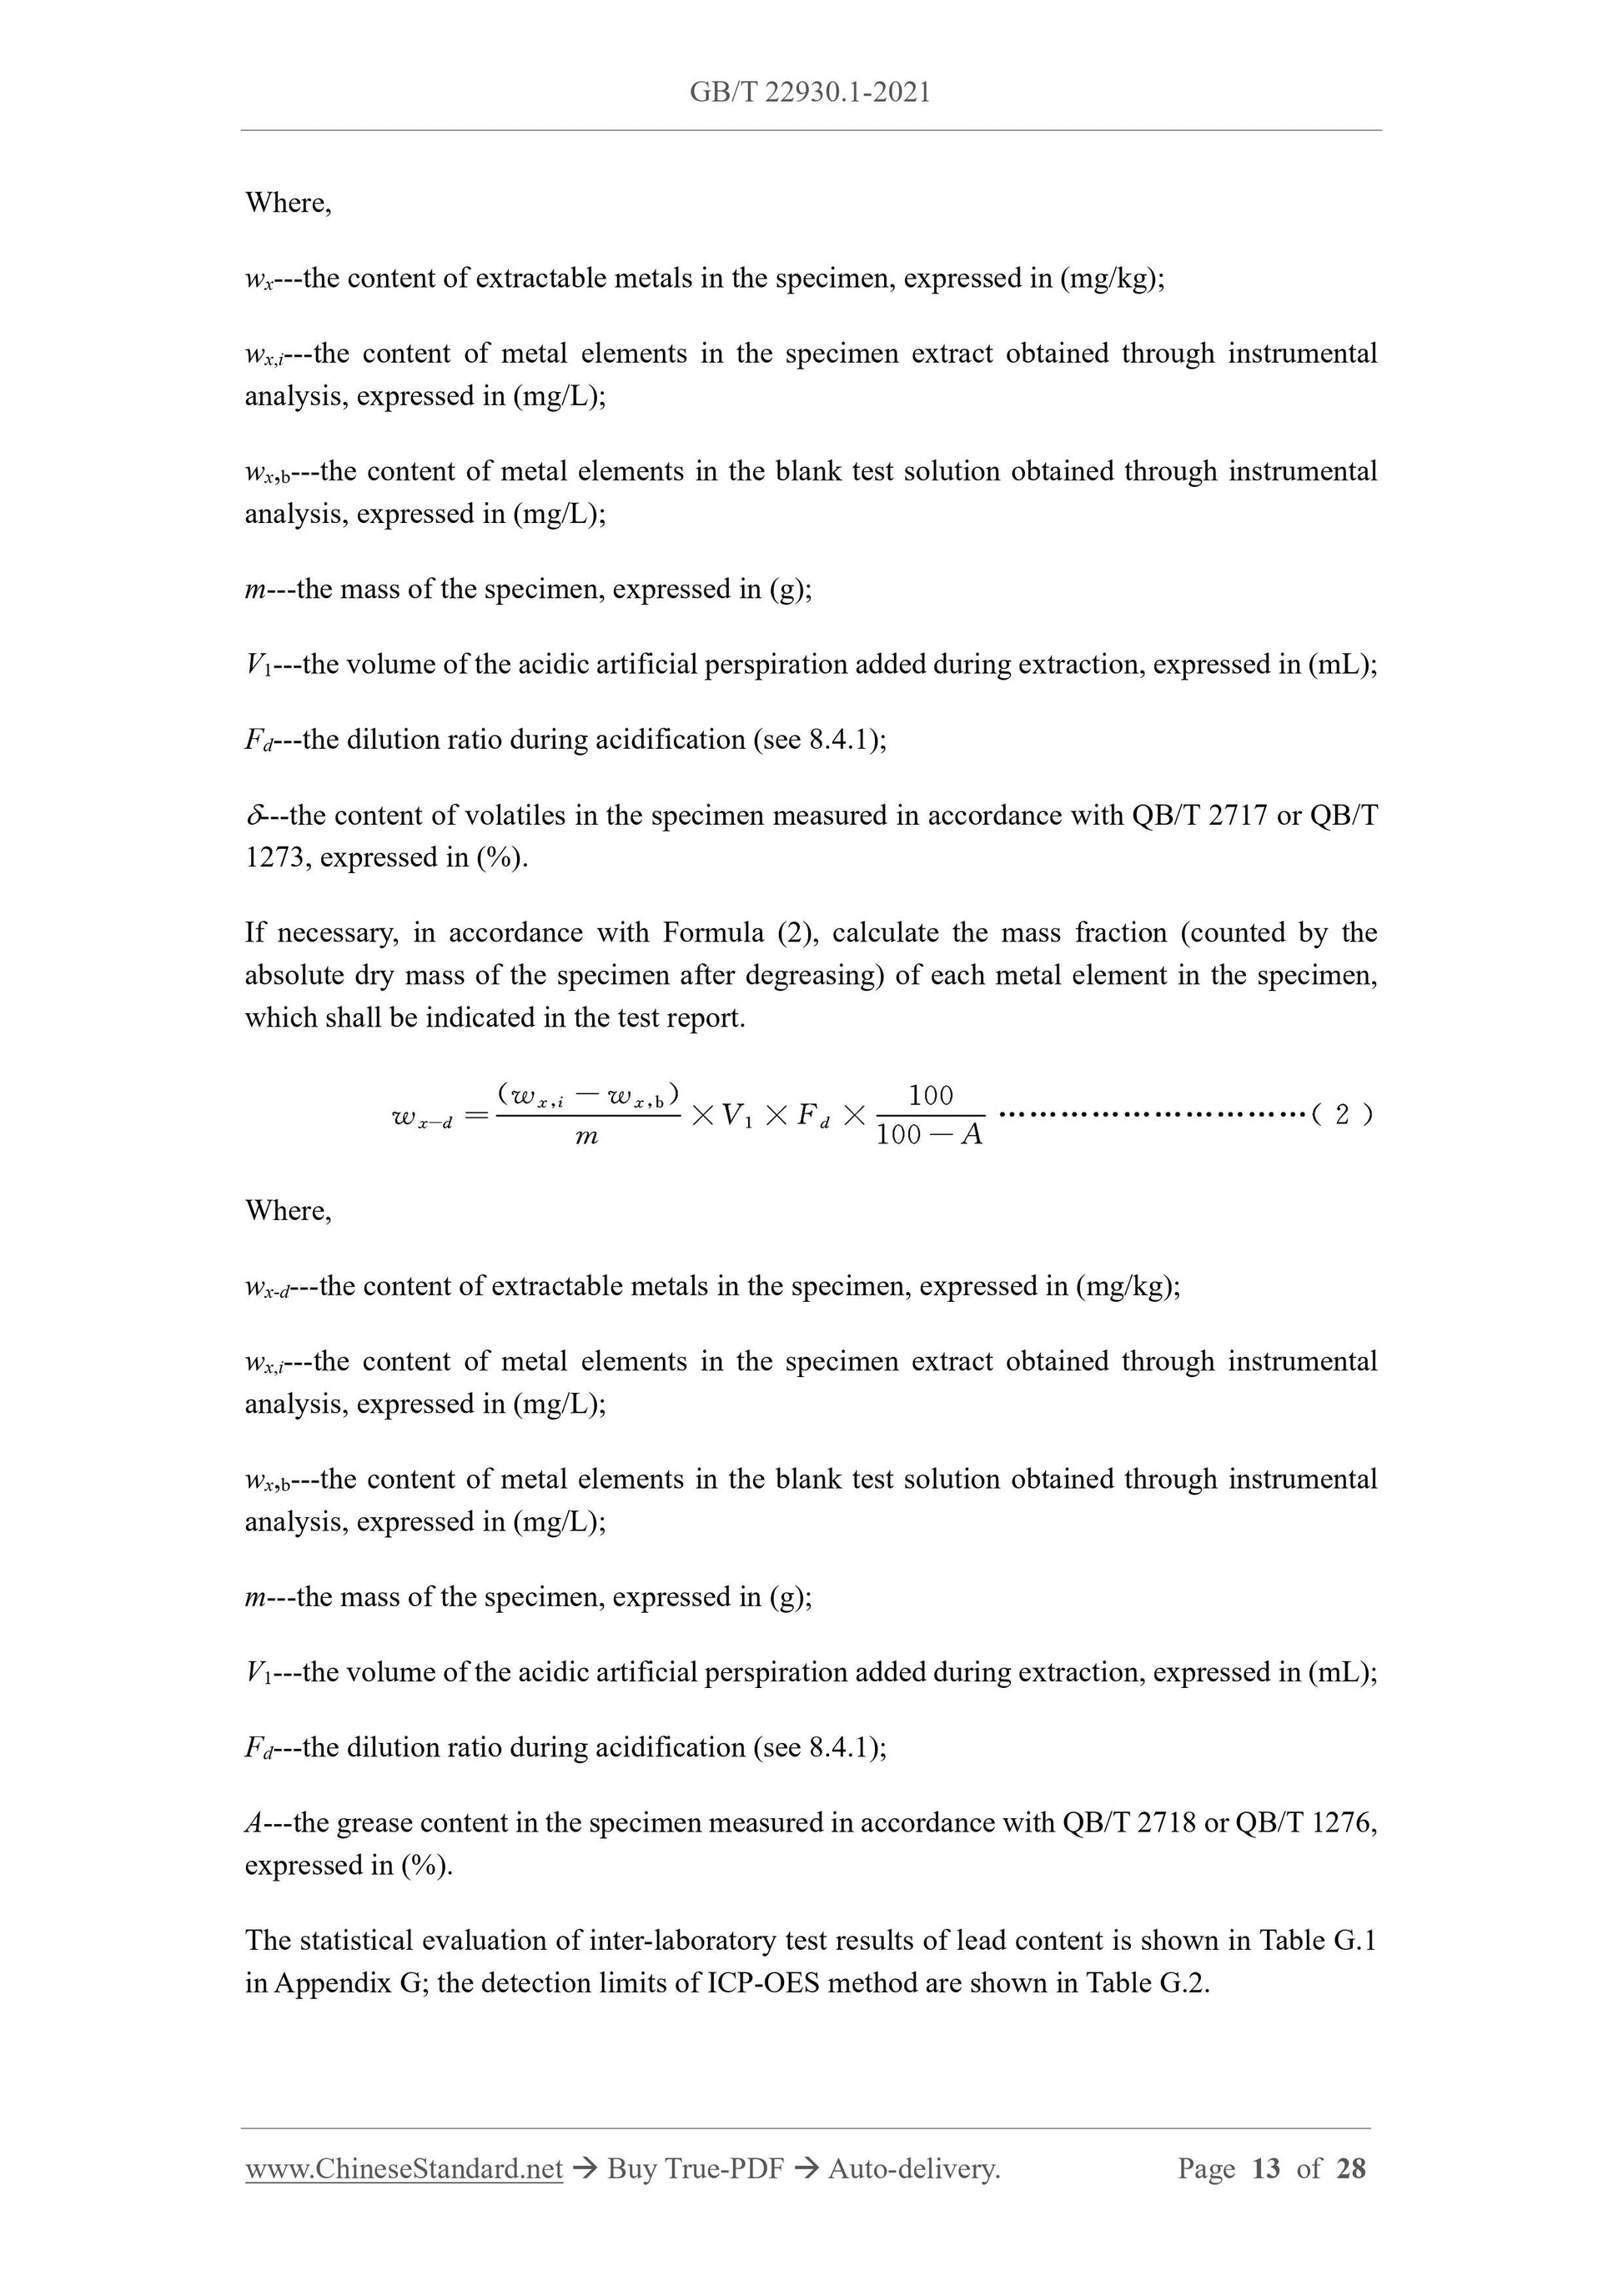 GB/T 22930.1-2021 Page 8